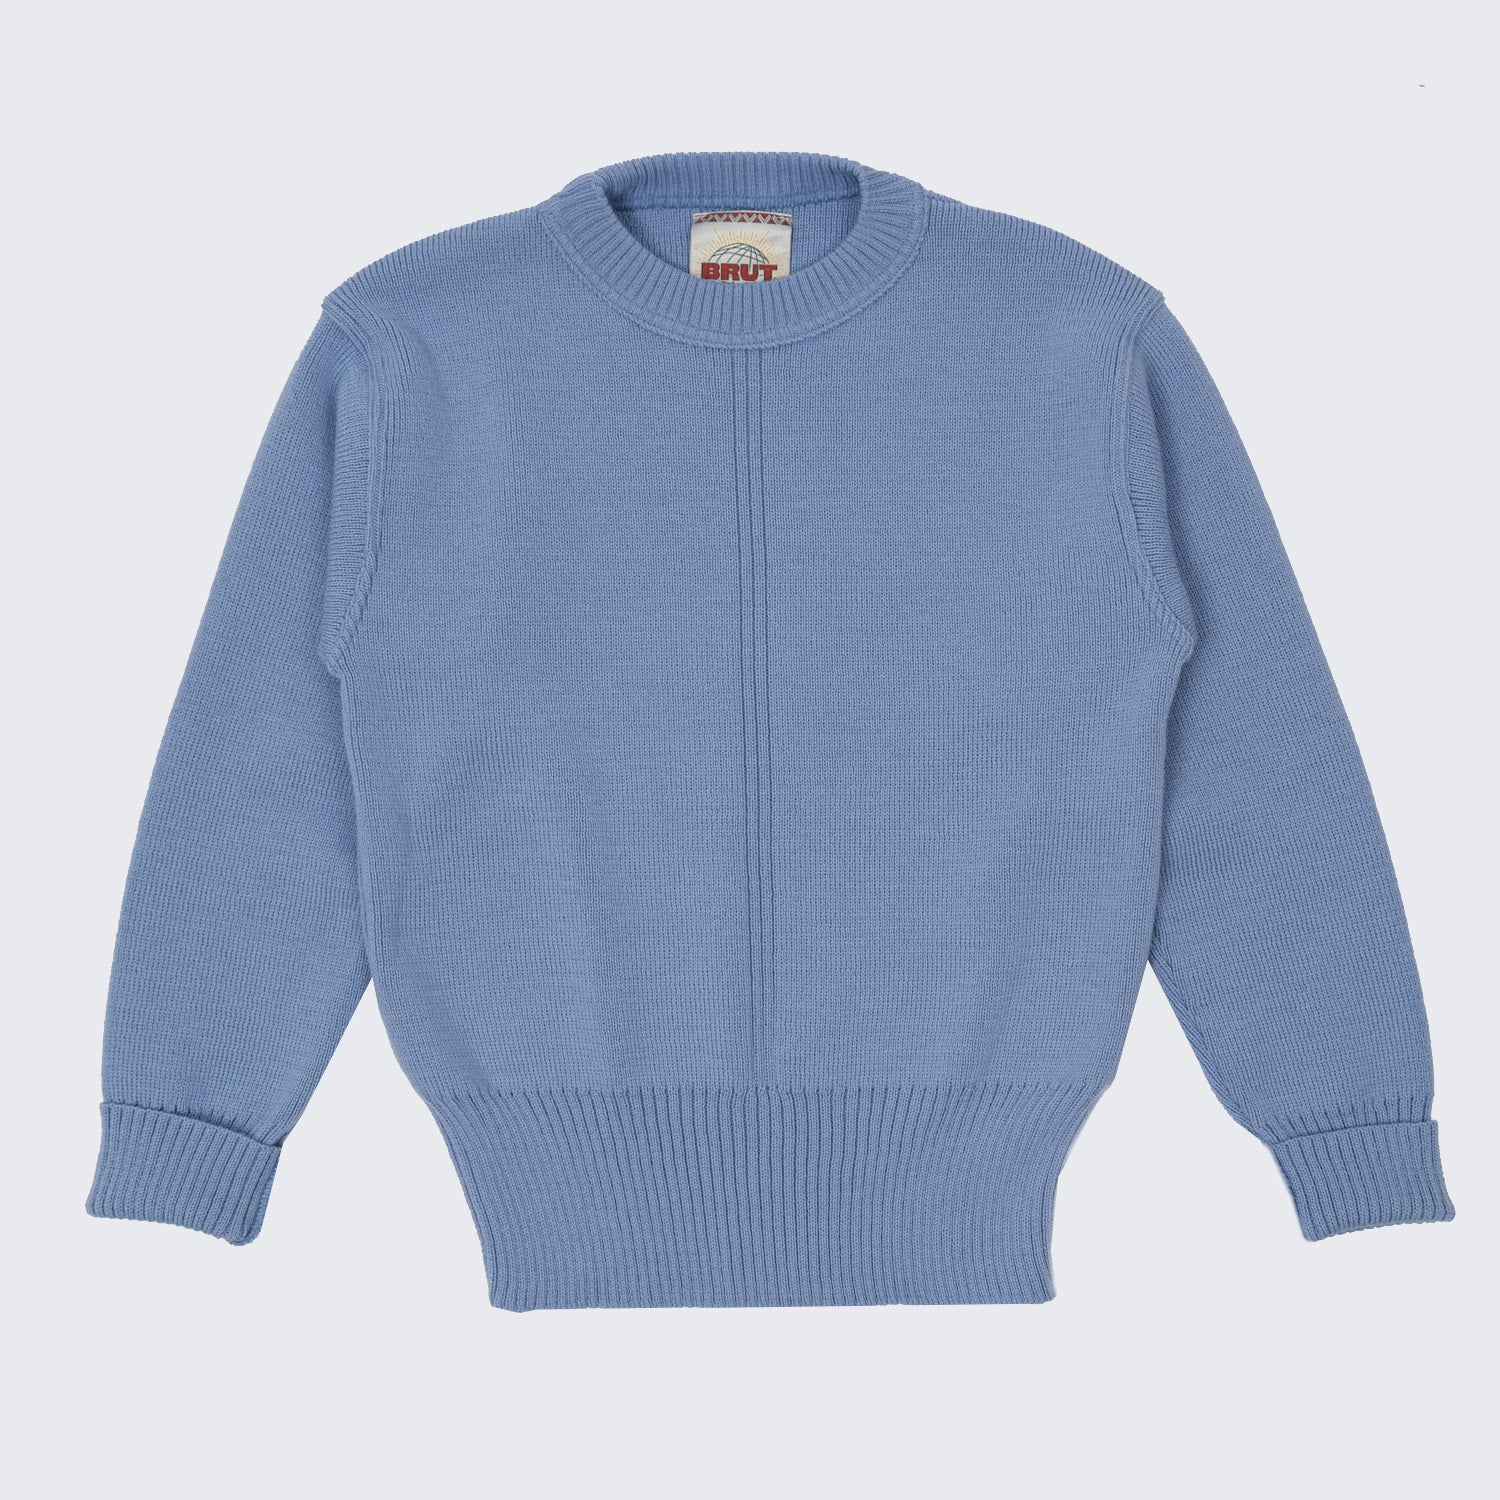 JERSEY 1940 – BABY BLUE - BRUT Clothing